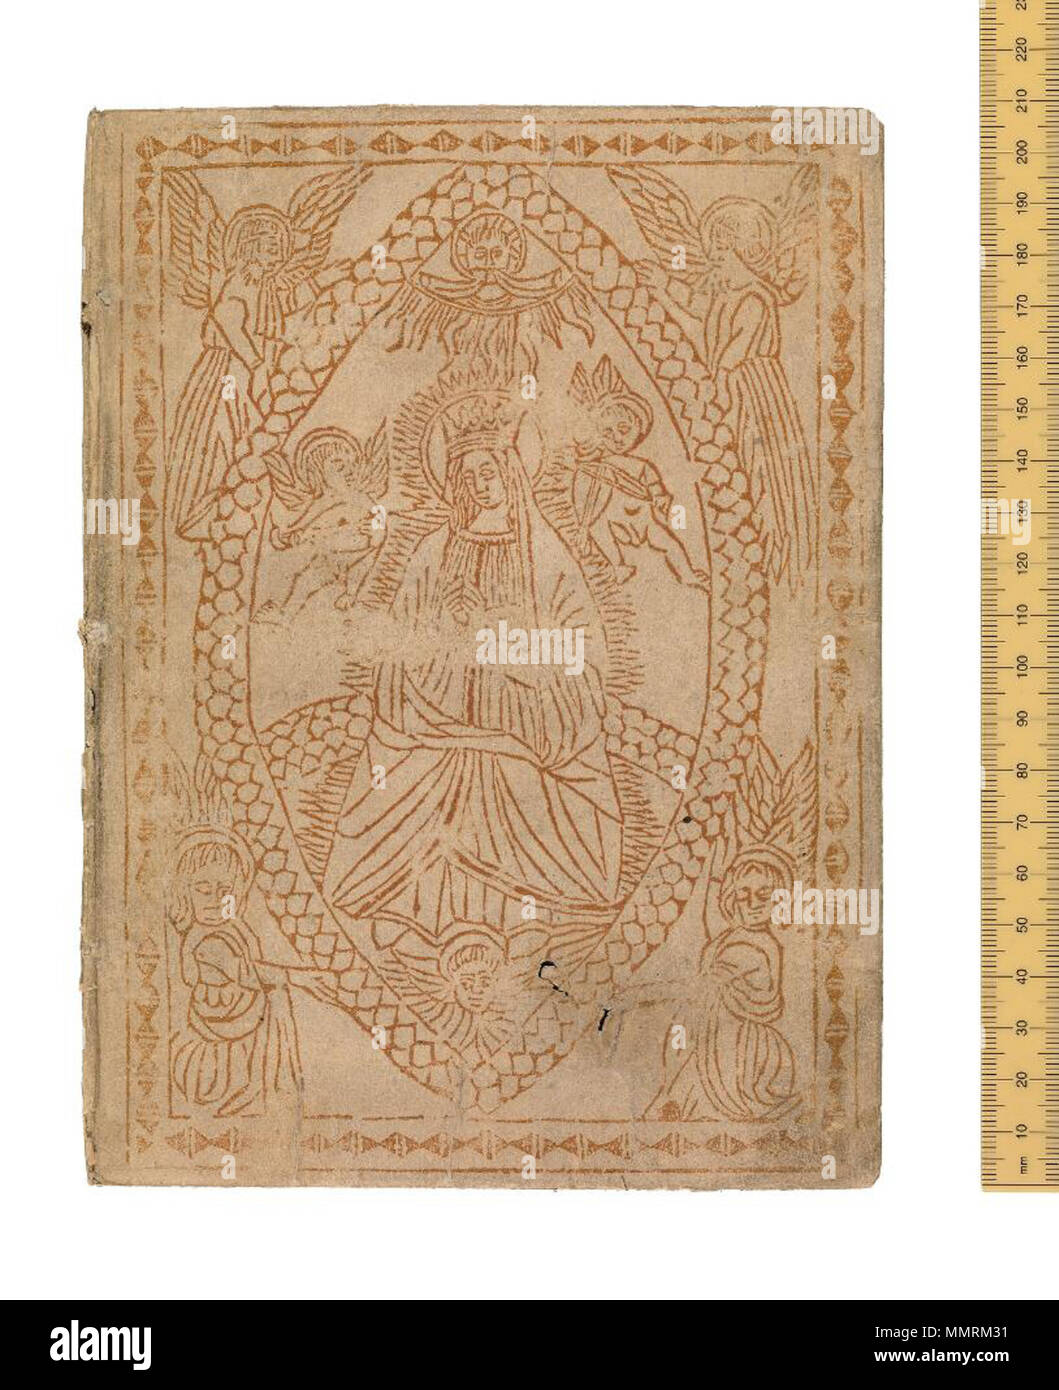 . An early paper-covered binding. Italian (Bologna?), c. 1491(?). Paper wrappers decorated with a woodcut image in red of the Virgin Mary within a mandorla. Although this cover lacks the book it was made for, the woodcut is another impression of one on the unique copy of the Miracoli della Madonna (Bologna, 1491), suggesting the wrapper indicated the subject-matter of the book.  Assumption of the Virgin. between 1490 and 1492. Bodleian Libraries, Assumption of the Virgin Stock Photo